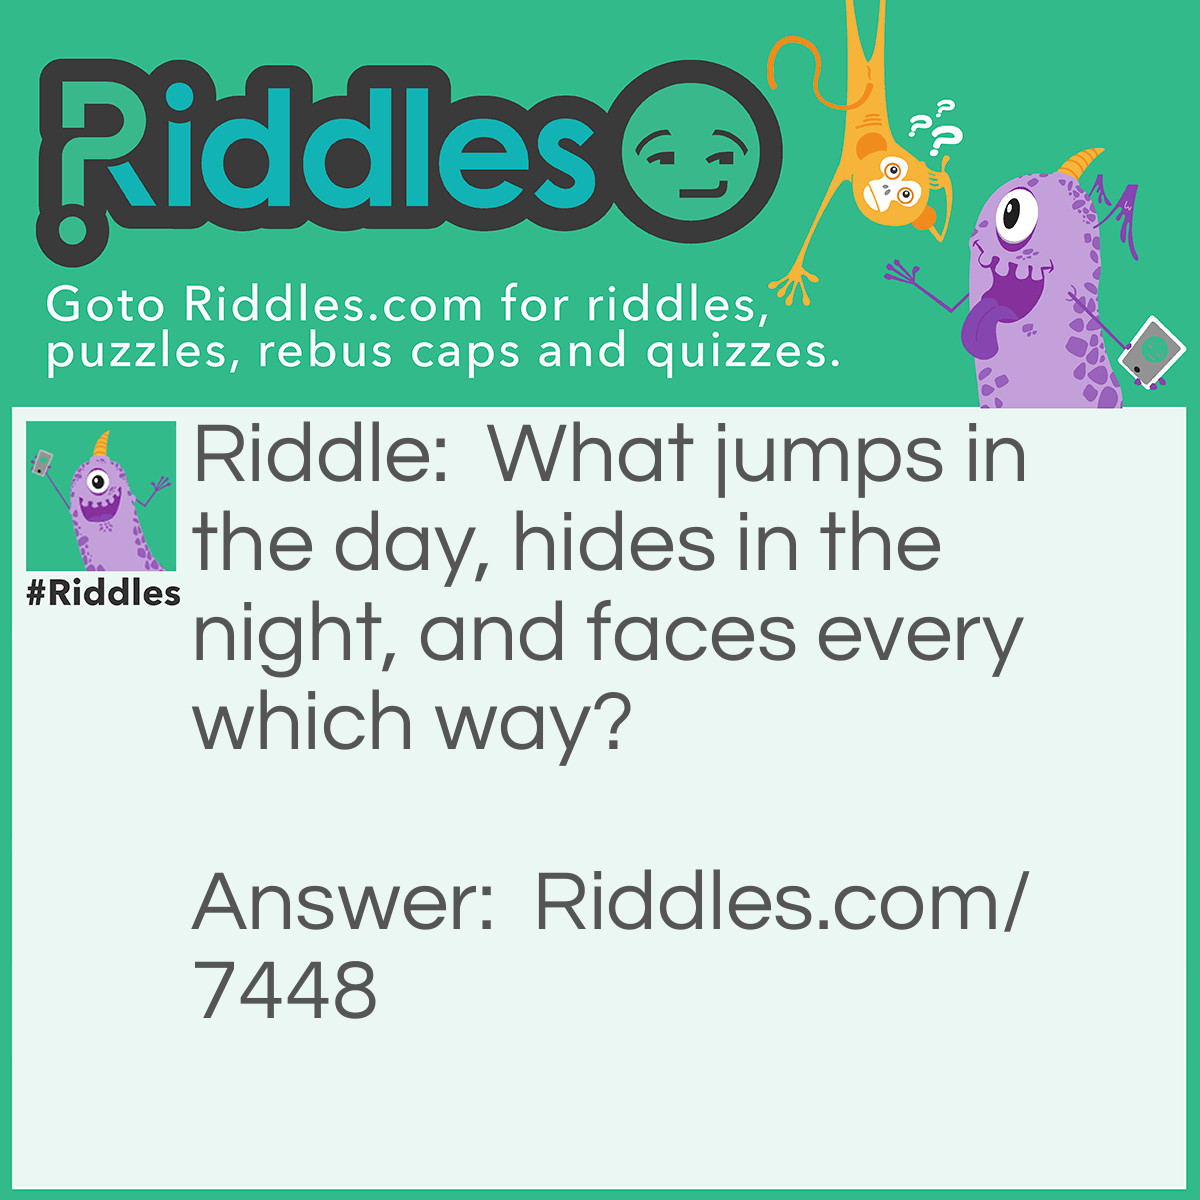 Riddle: What jumps in the day, hides in the night, and faces every which way? Answer: A shadow.